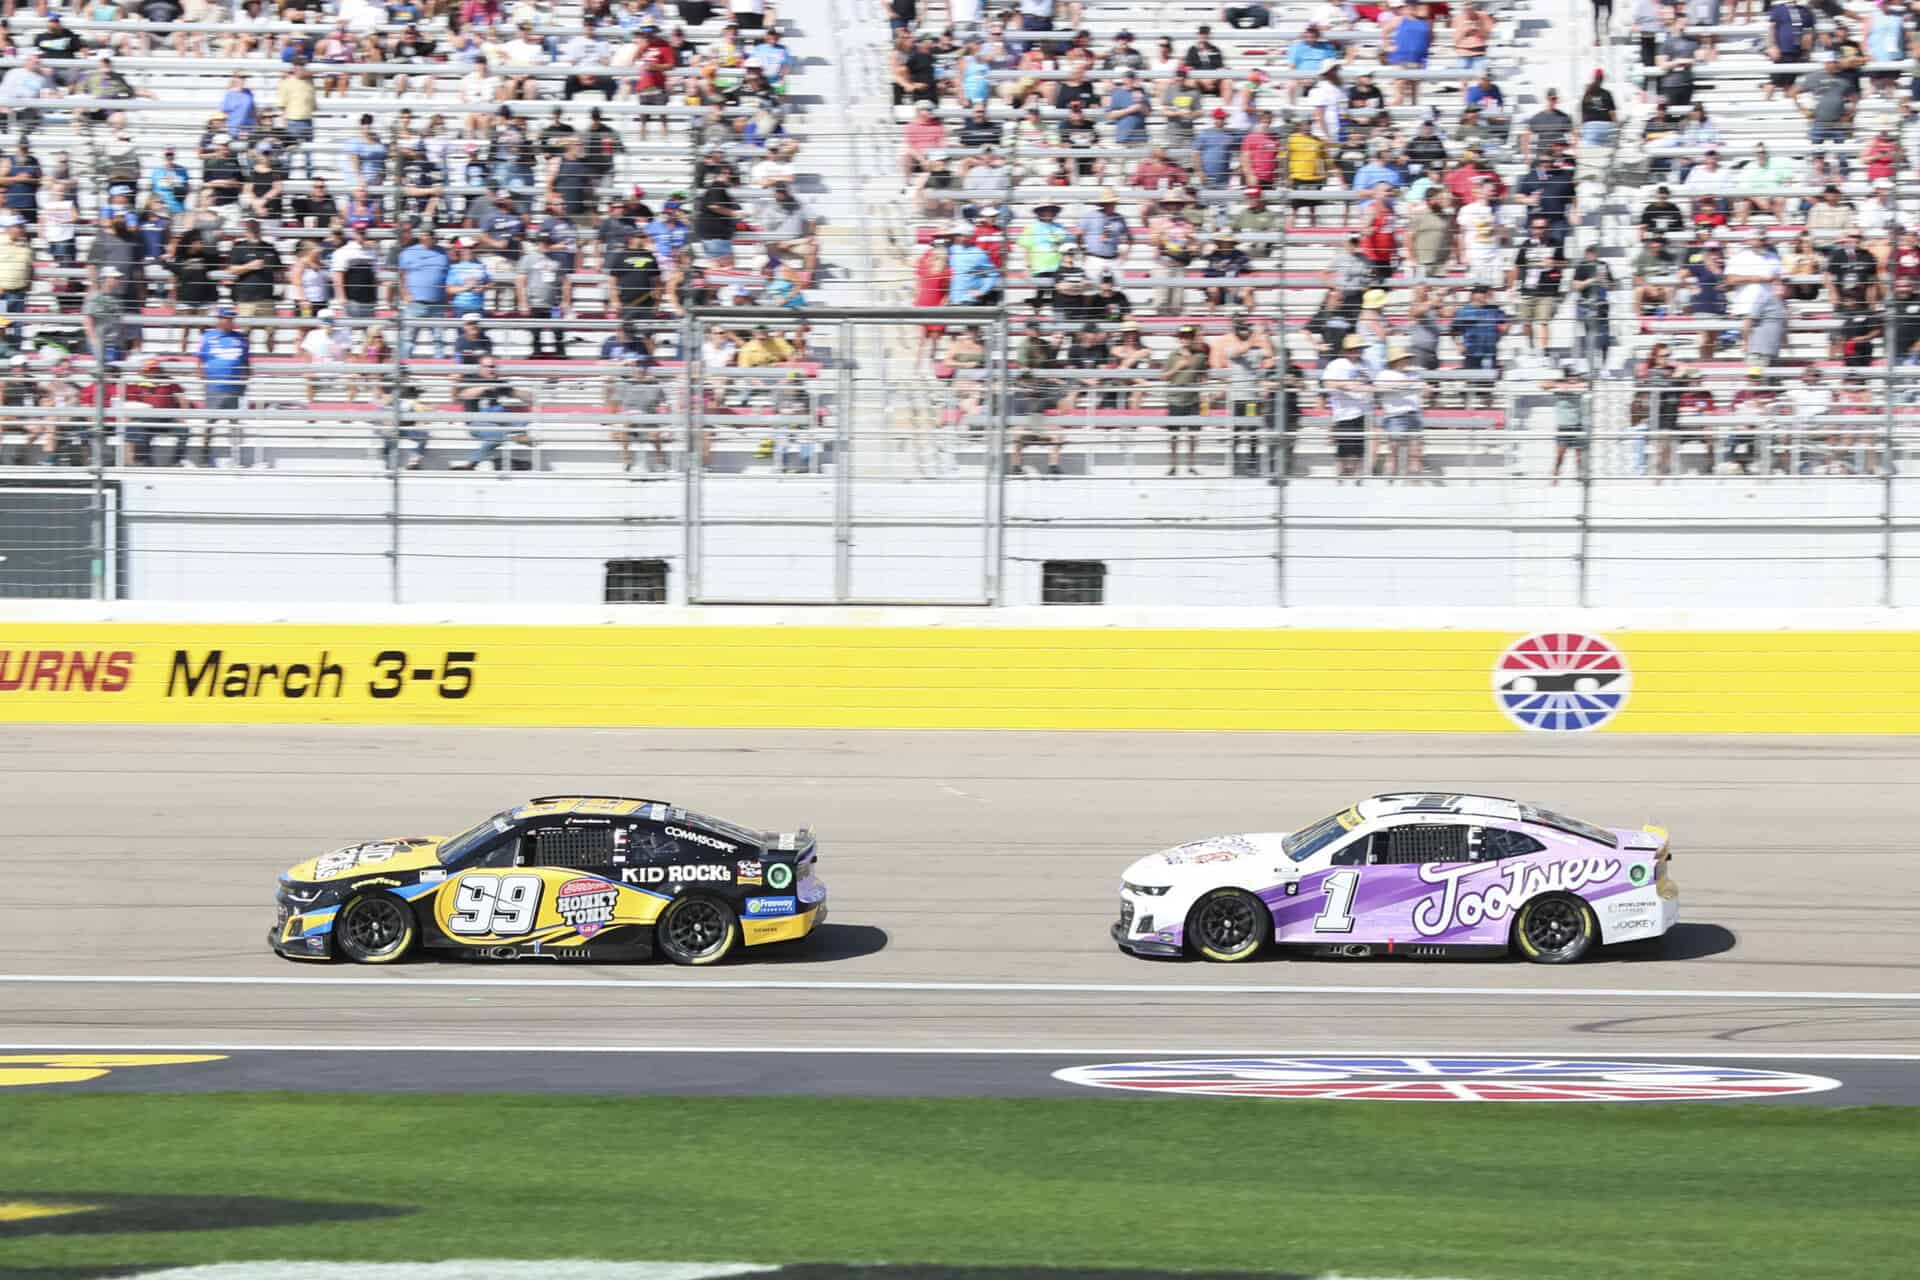 Daniel Suarez and Ross Chastain lead part of the South Point 400 at Las Vegas Motor Speedway. Photo by Rachel Schuoler.